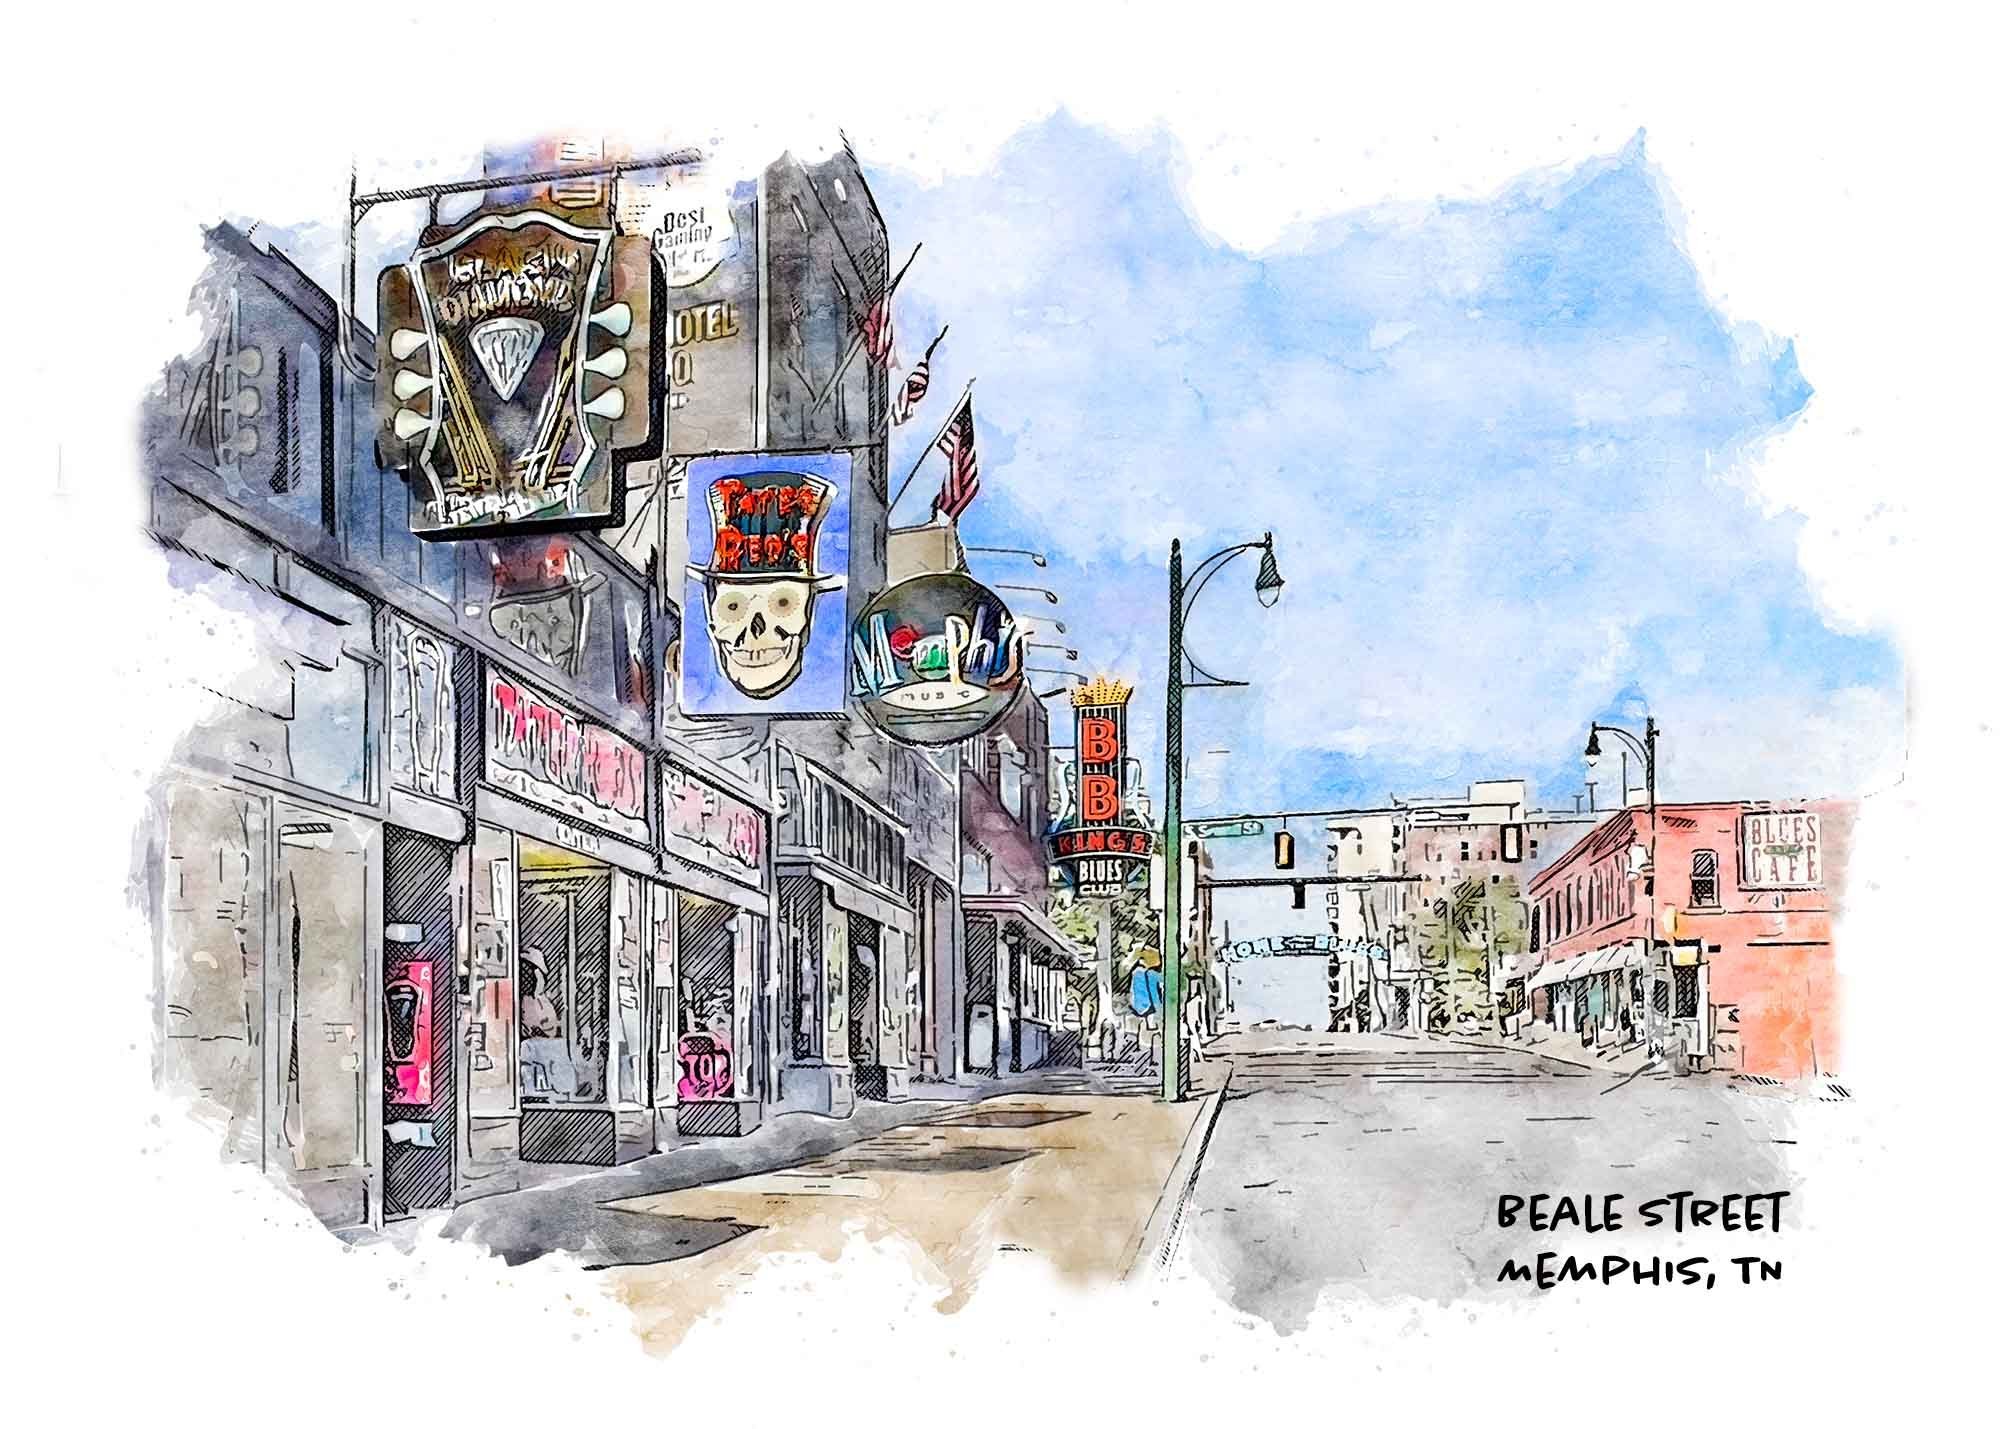 Welcome to beautiful Beale Street in Memphis Tennessee!  Get your souvenir print here or on our Etsy store (SheStudiosArt)  #BealeStreet #bealestreetmemphis #Memphis #souvenir